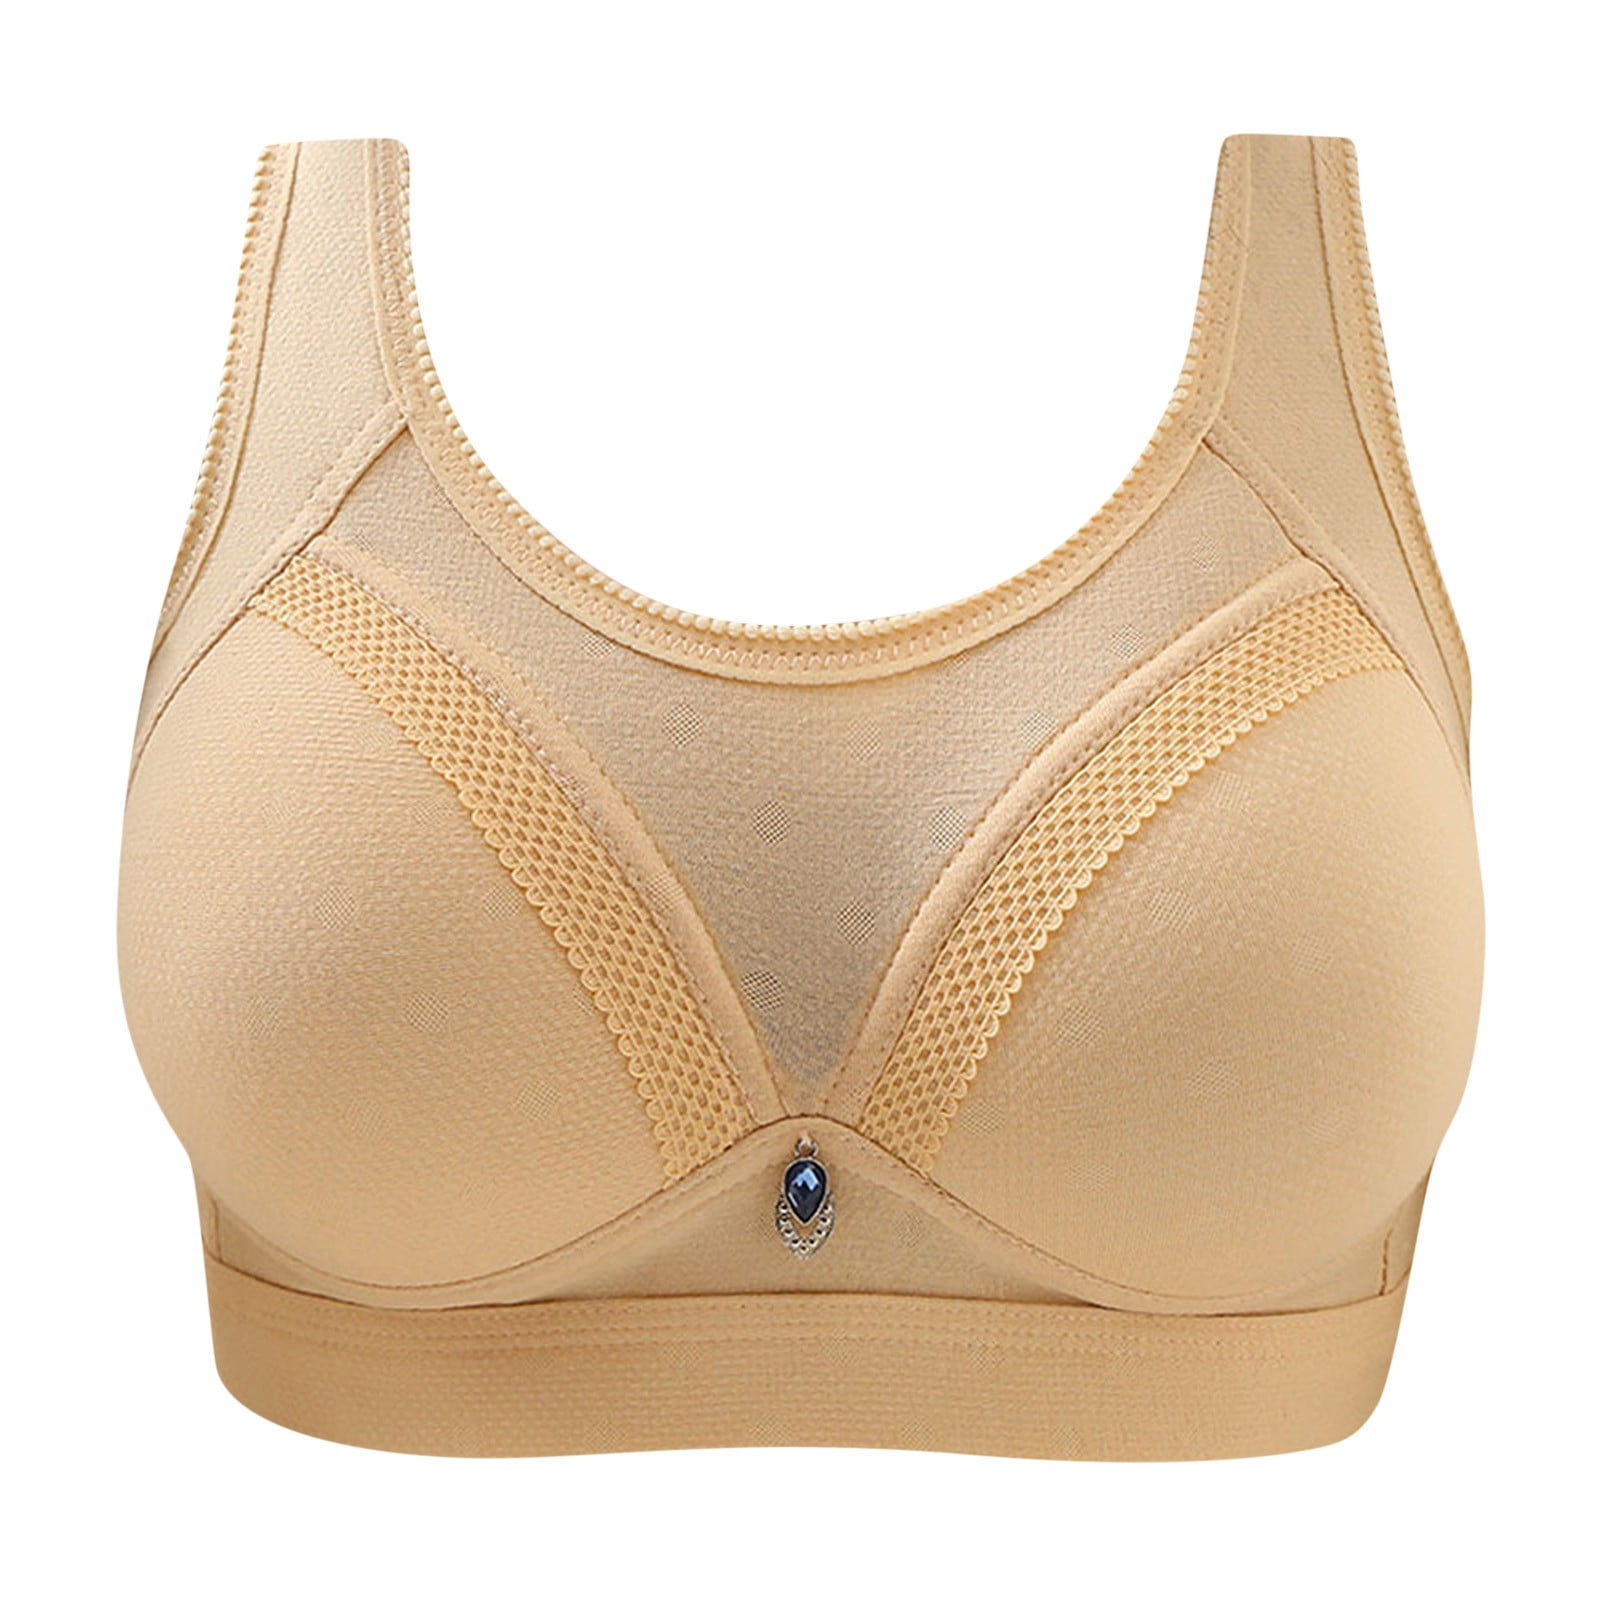 Daisy Bra Front Closure, Women's Daisy Bra, Front Snaps Button Bras No  Underwire Push Up High Support Sports Push Up Bra